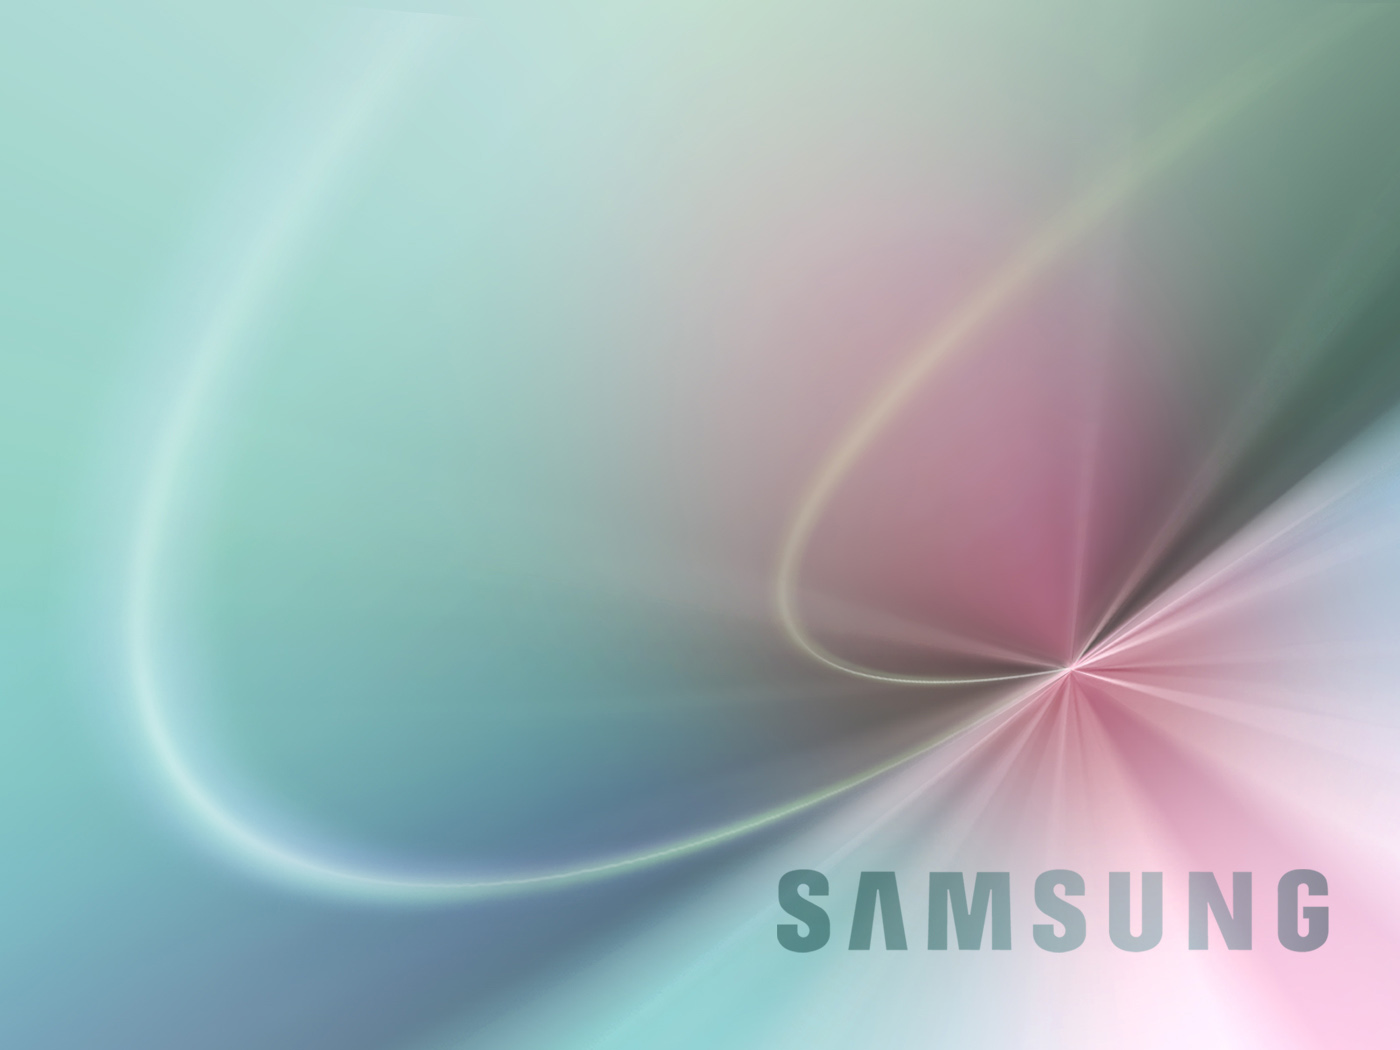 22 Hd Wallpapers For Samsung Laptop 1400x1050